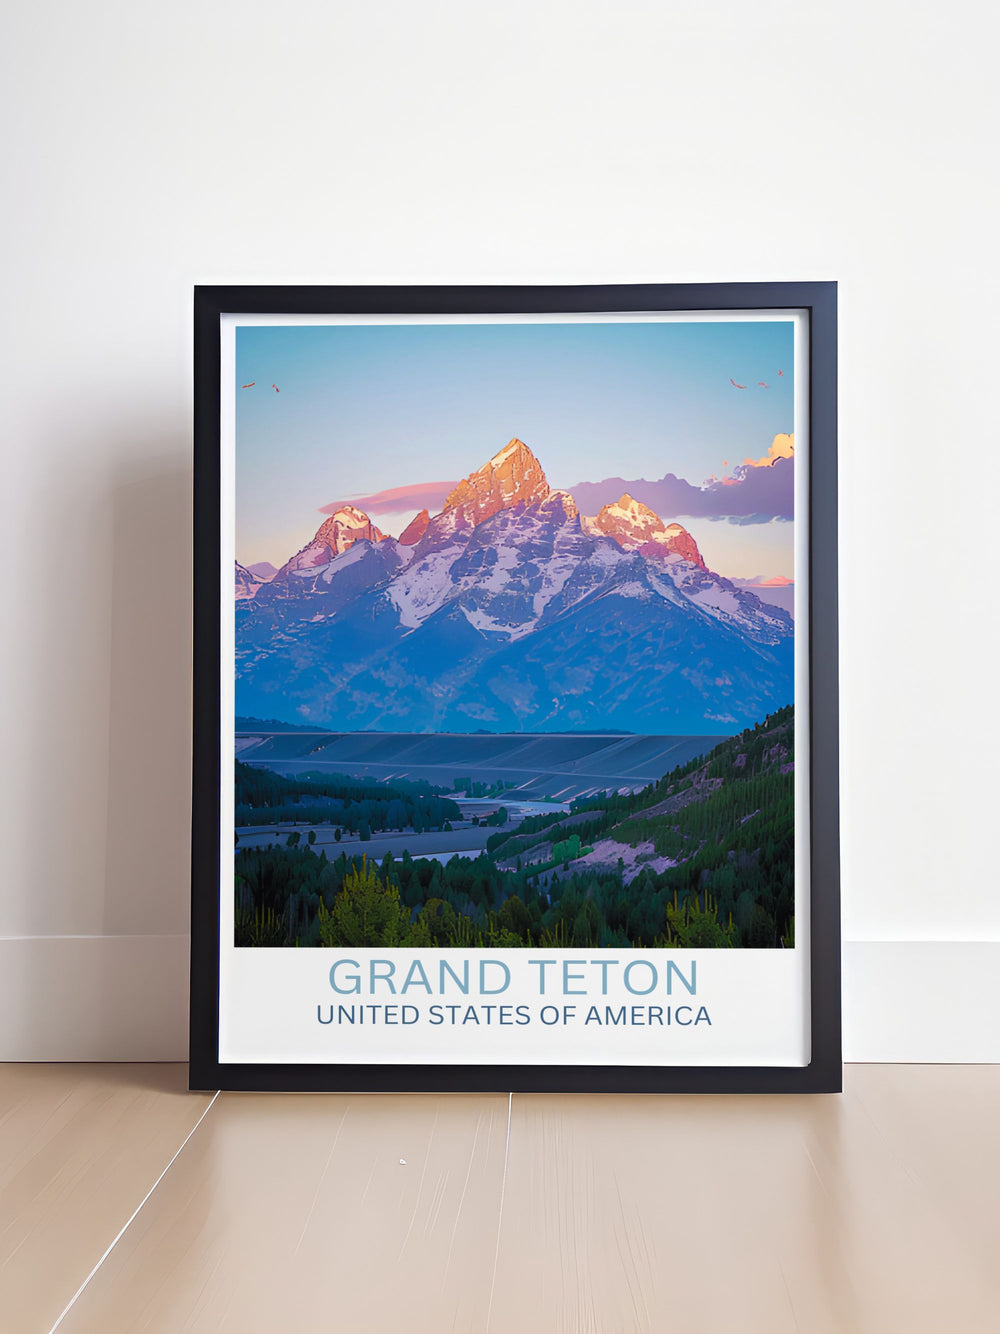 Panoramic view of Grand Teton National Park during spring, with Grand Teton Peak standing tall amidst blooming wildflowers and vibrant green fields.